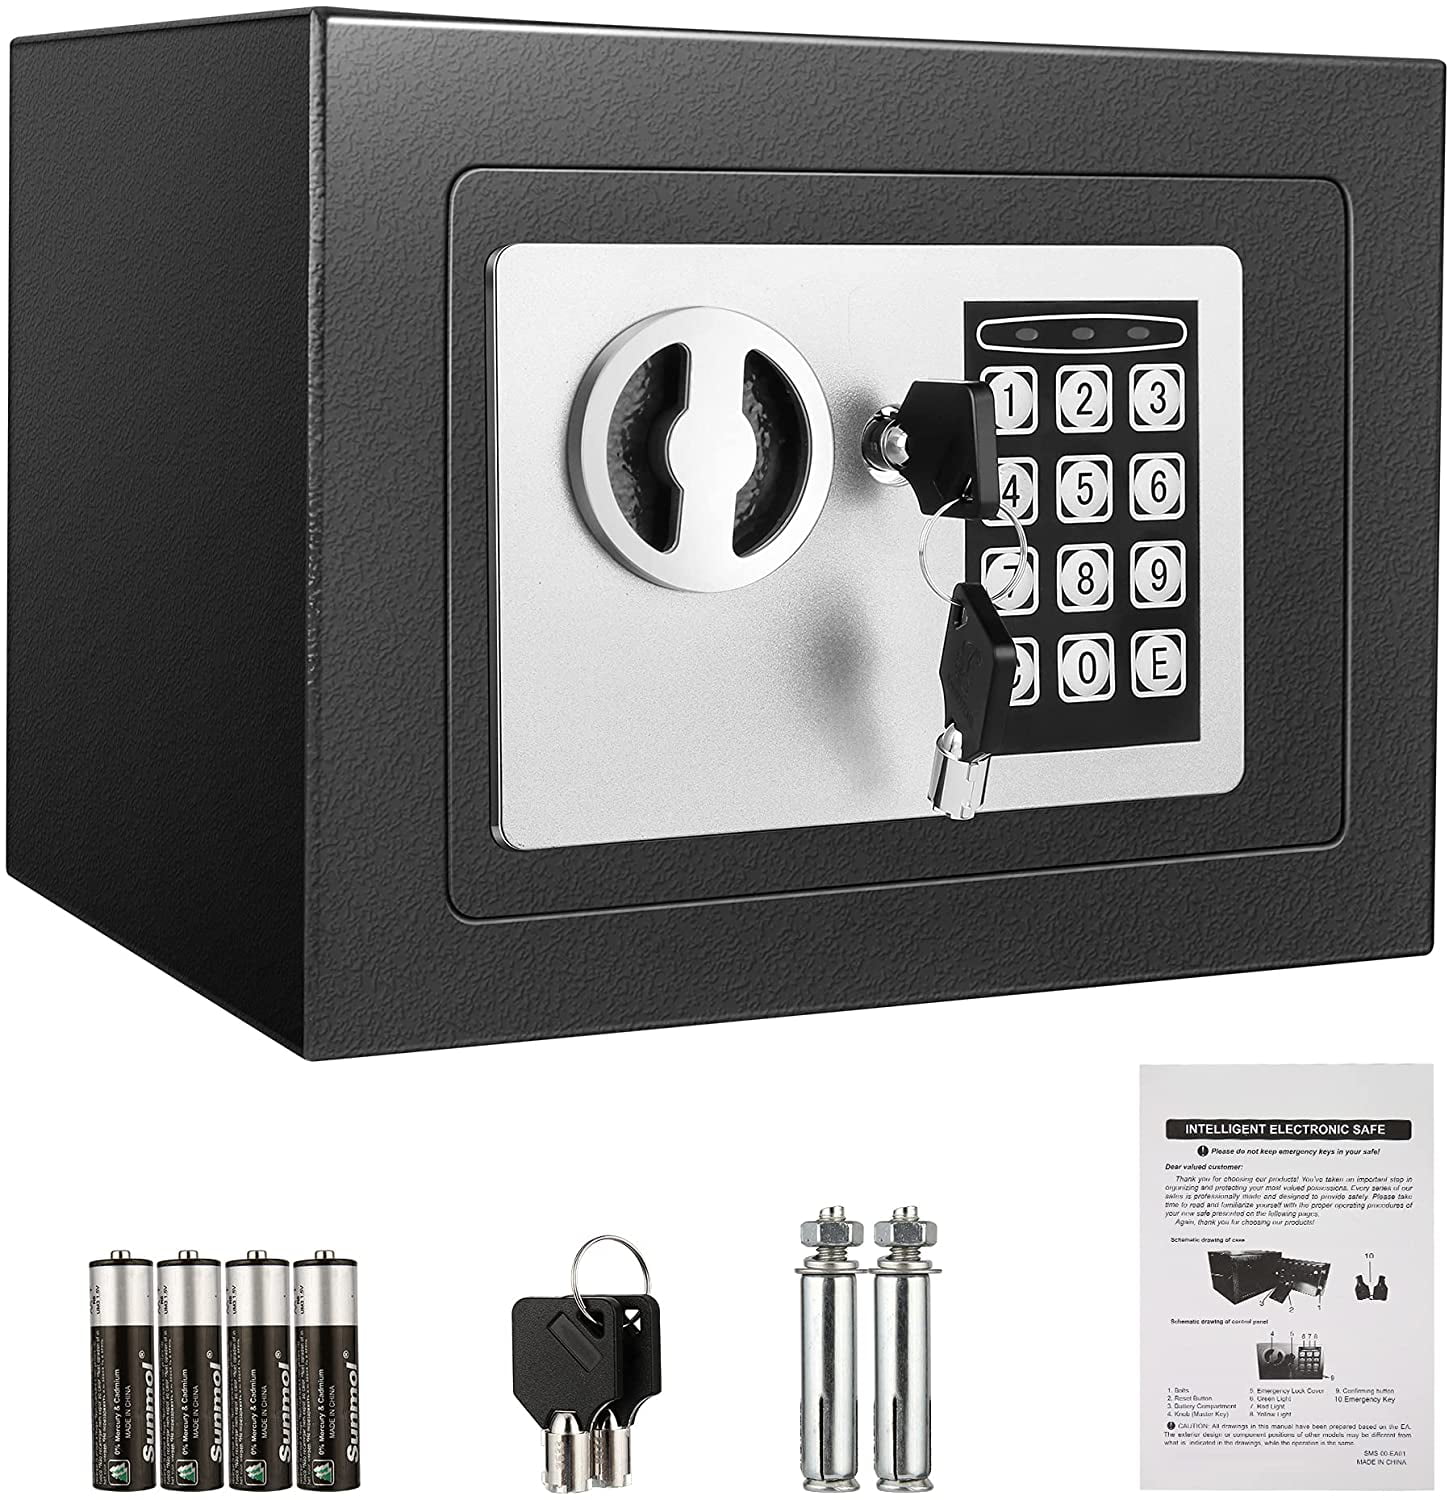 Strong Iron Steel Black Key Password Security Money Cash Safe Box Office House